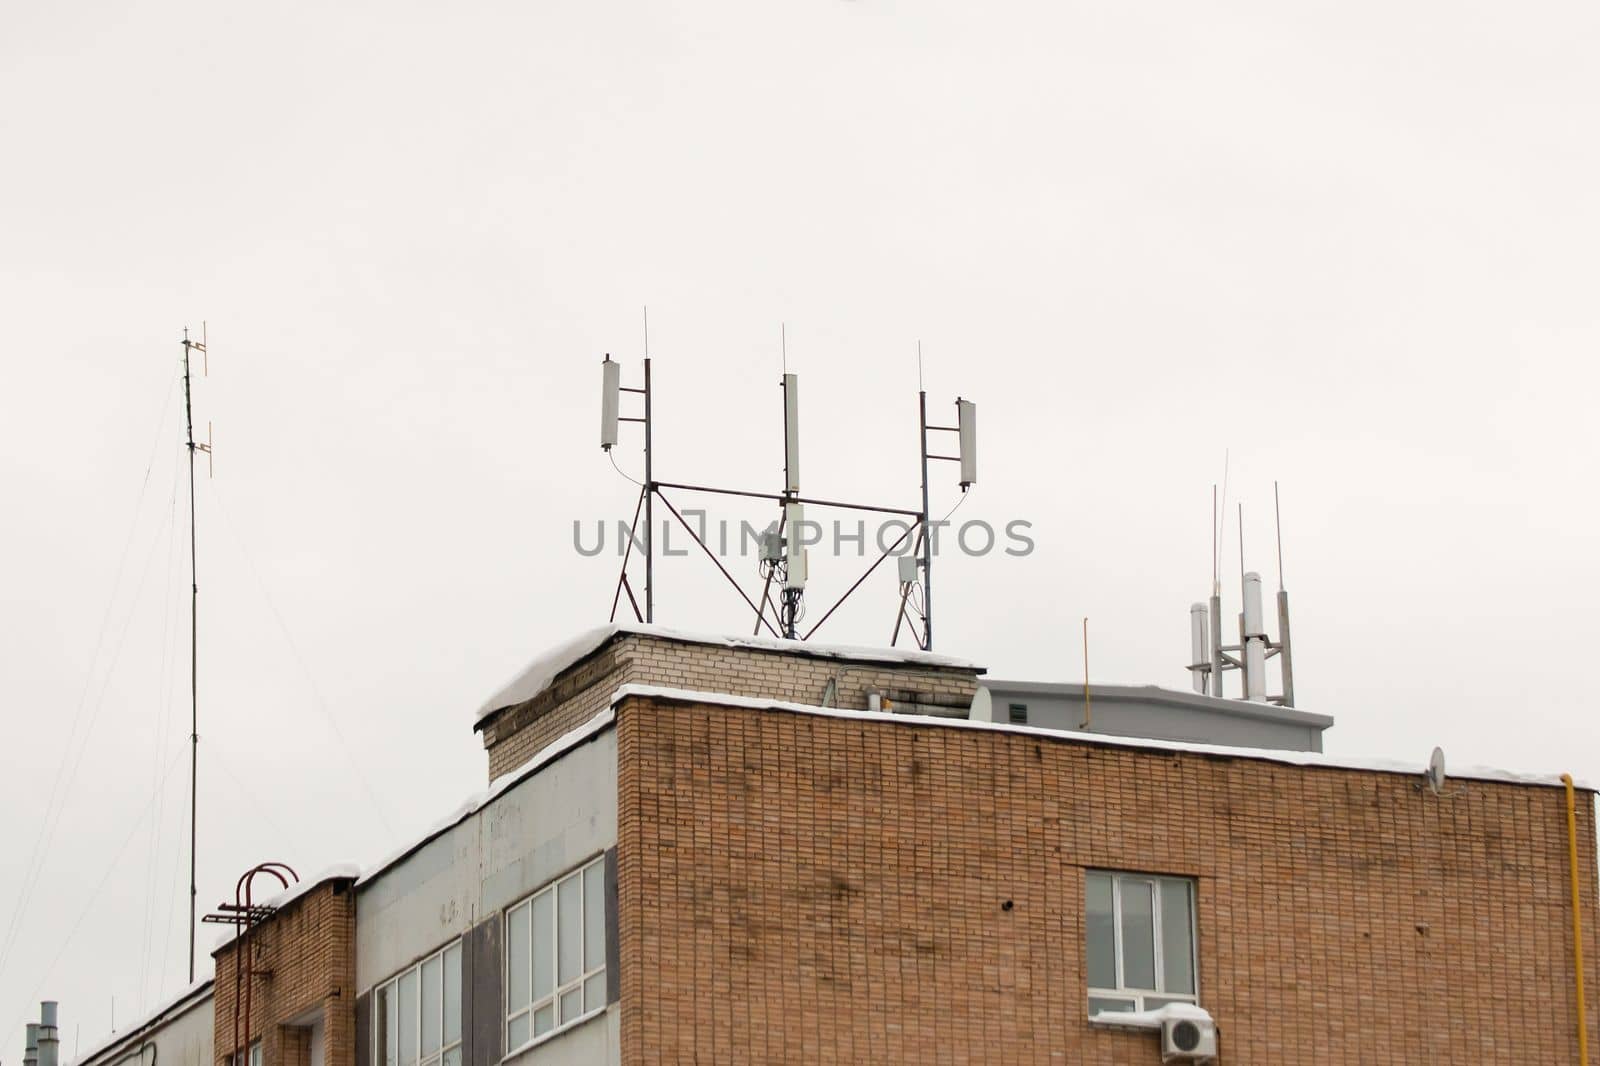 Many different cellular antennas on the roof of the house provide communication. Snow lies on the milestone, against the background of a gray sky. Cloudy, cold winter day, soft light.